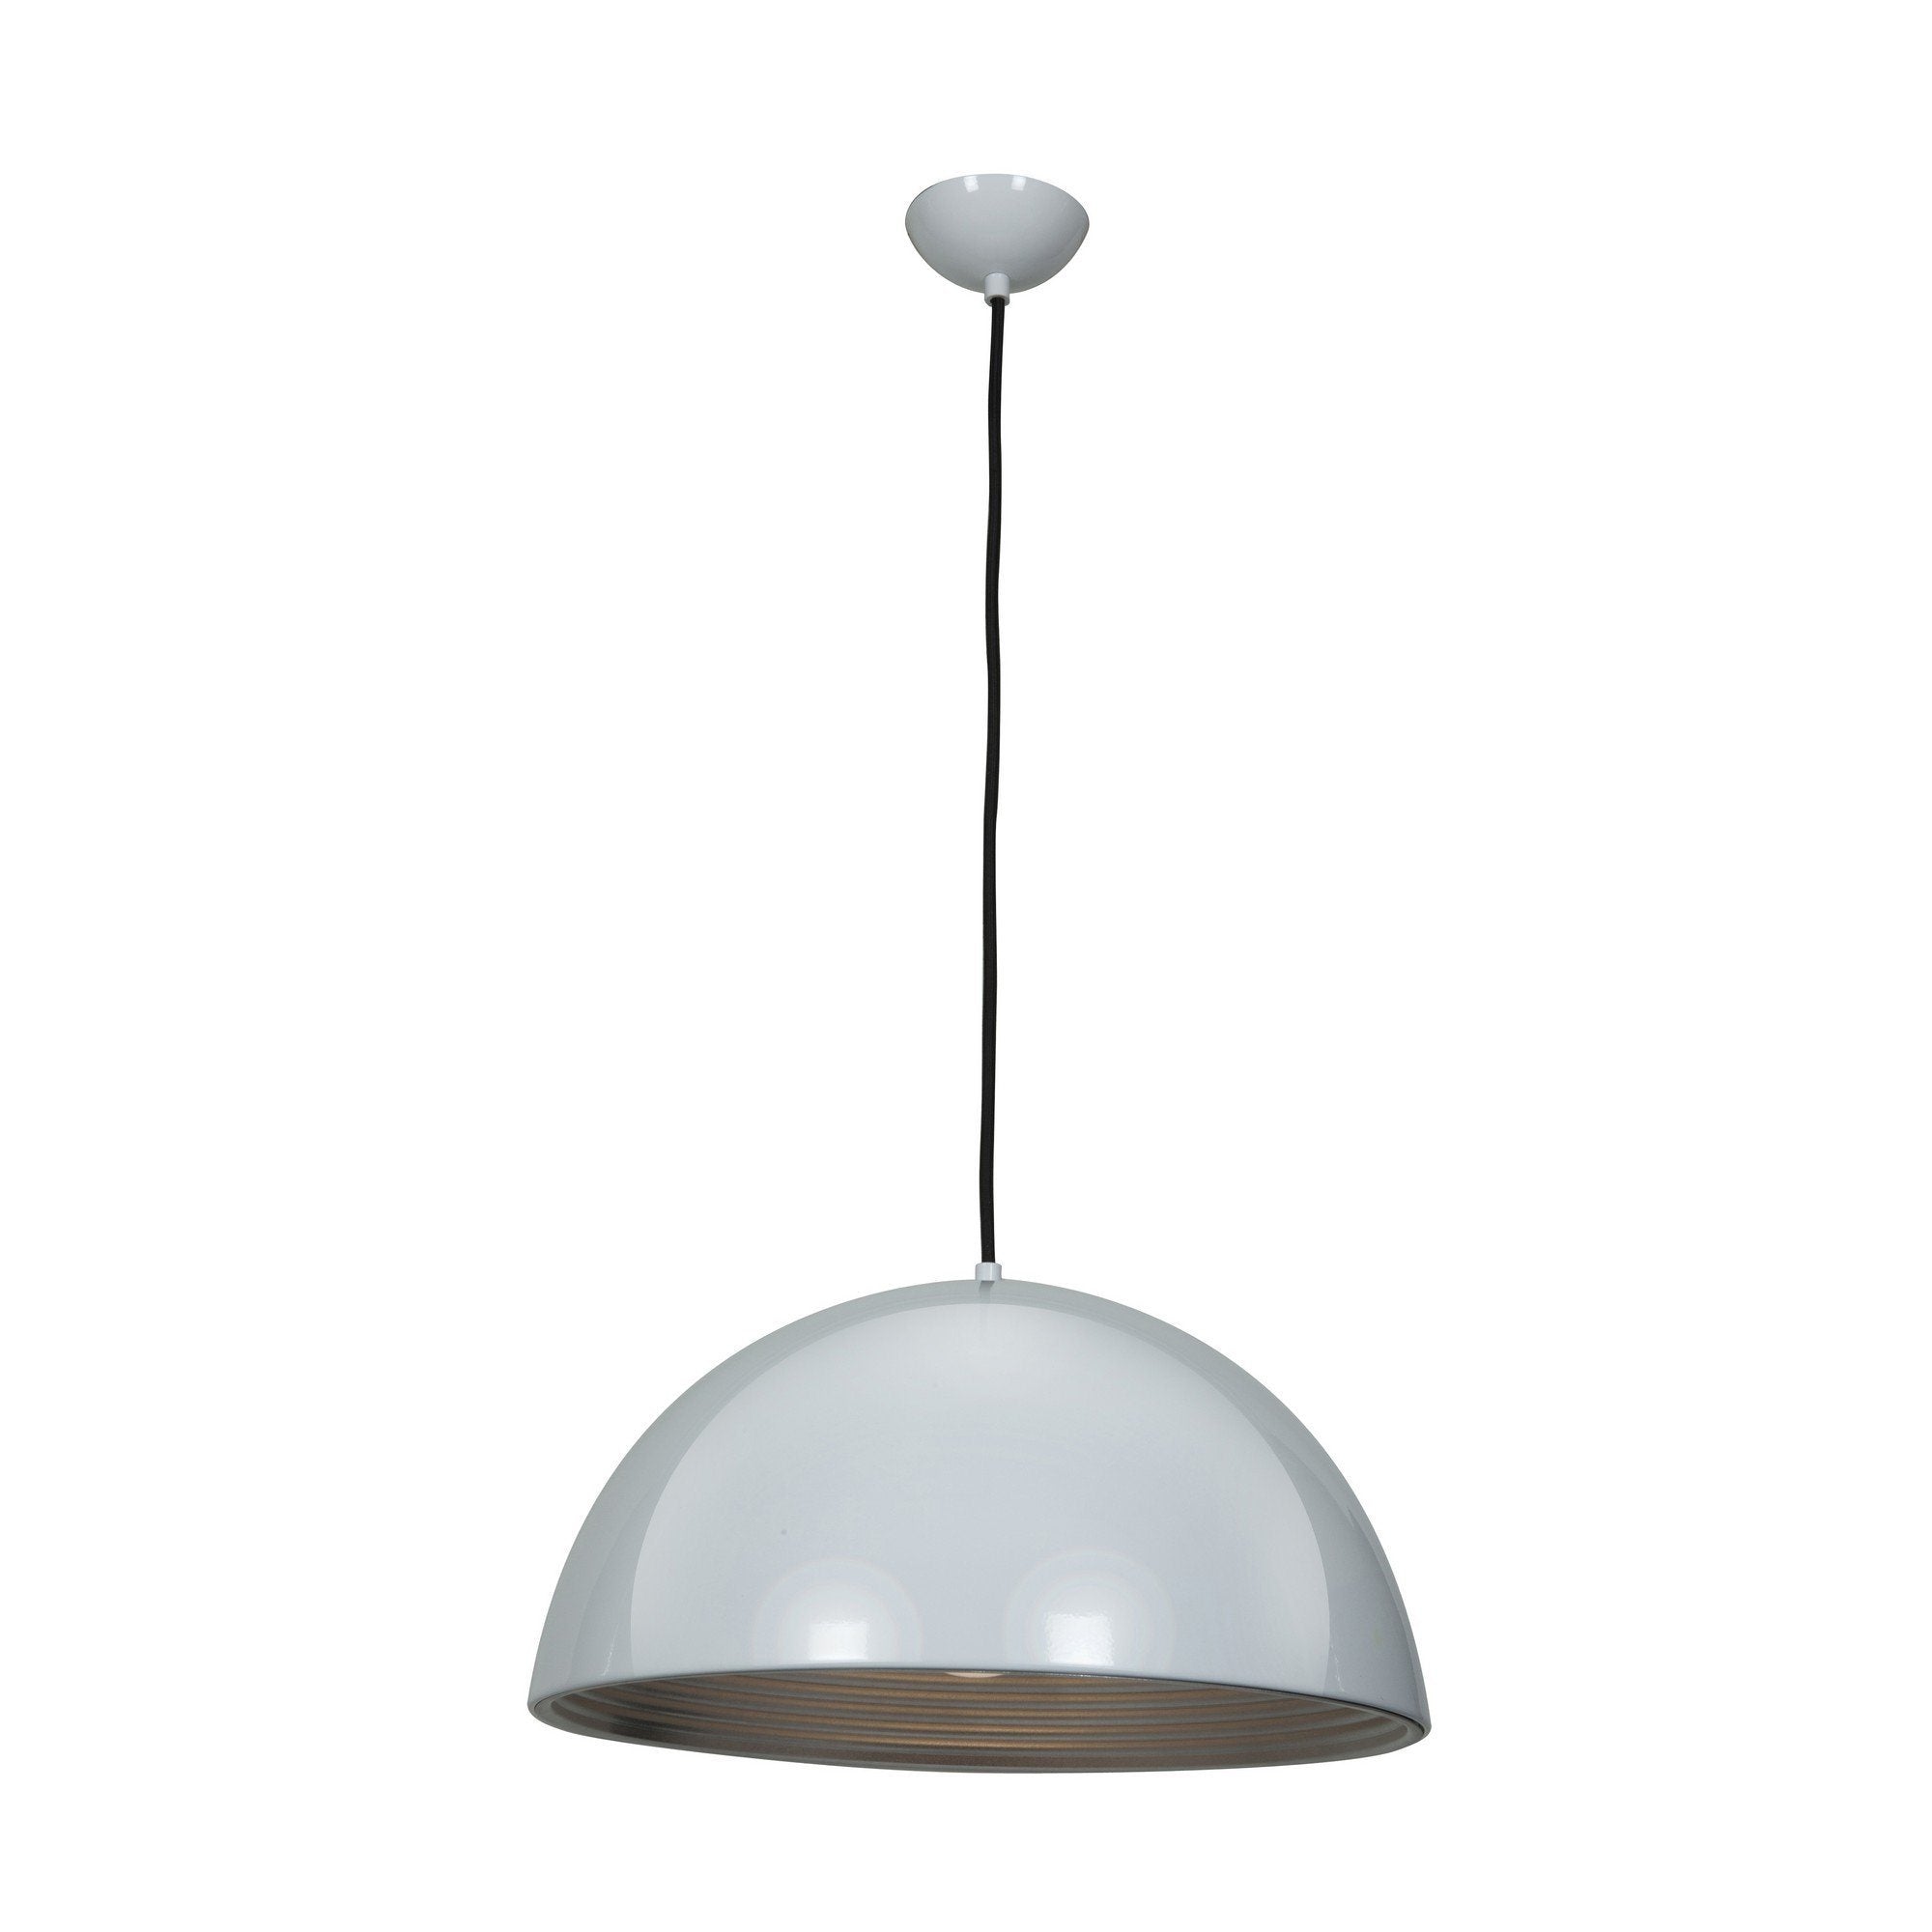 Astro (s) Dome Pendant - Silver Ceiling Access Lighting 